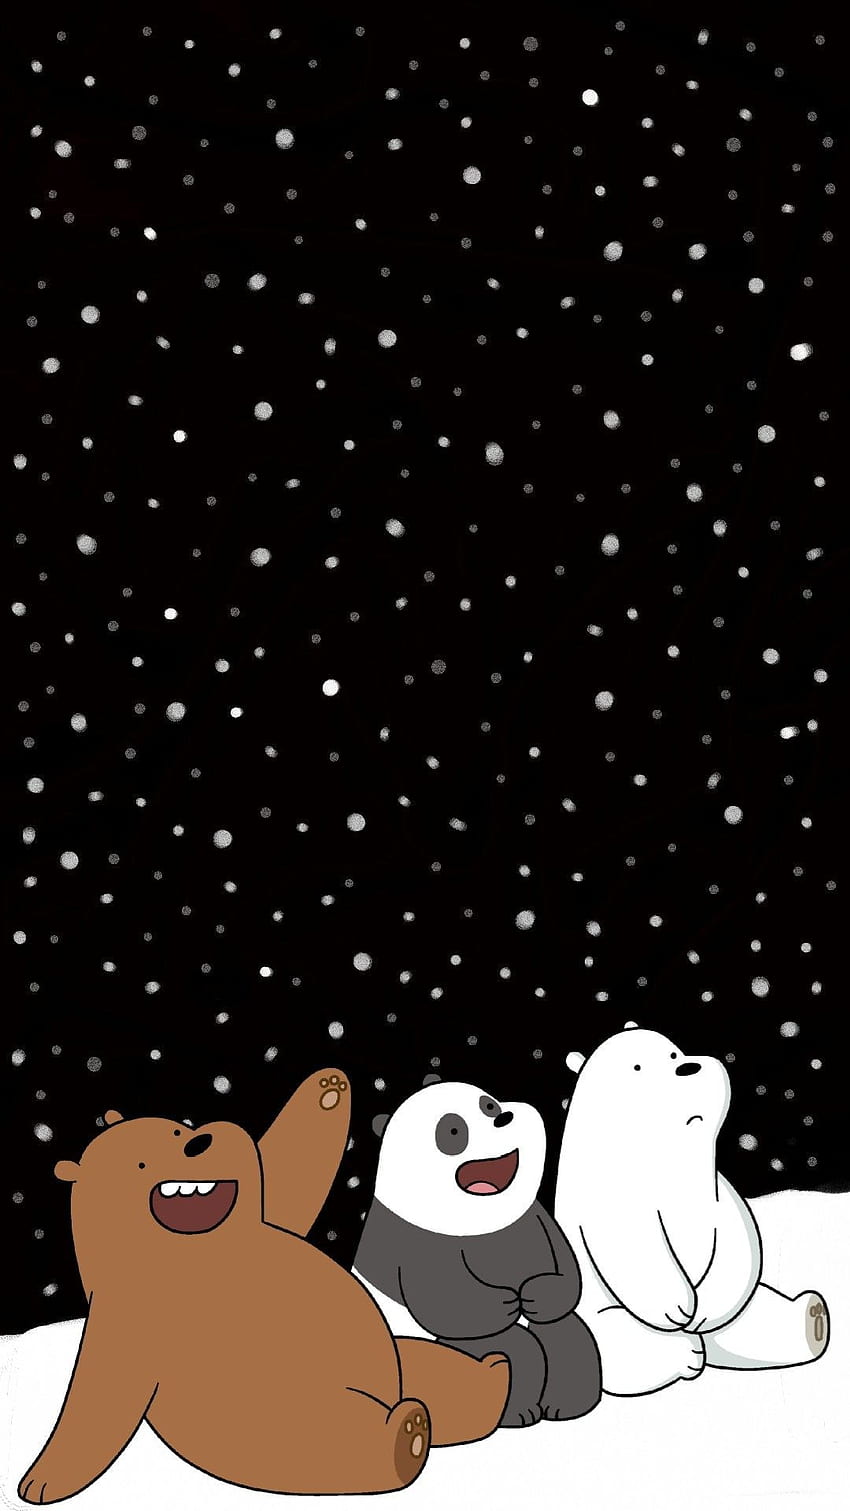 I edited this We Bare Bears and put in a little drizzle HD phone wallpaper